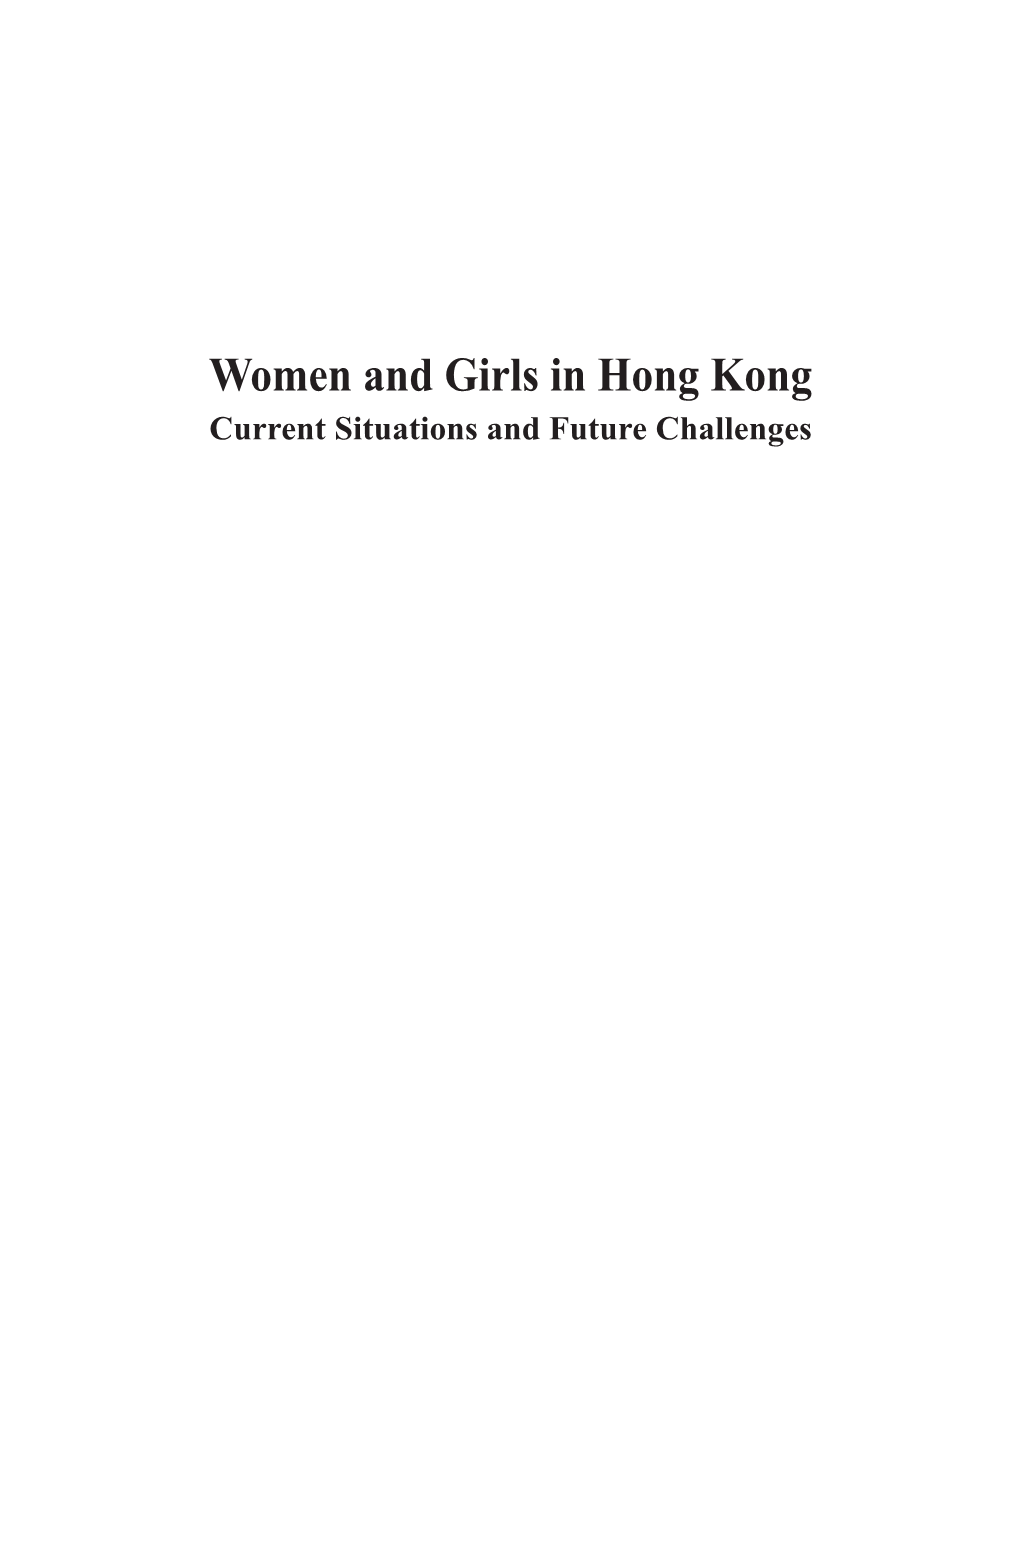 Women and Girls in Hong Kong Current Situations and Future Challenges